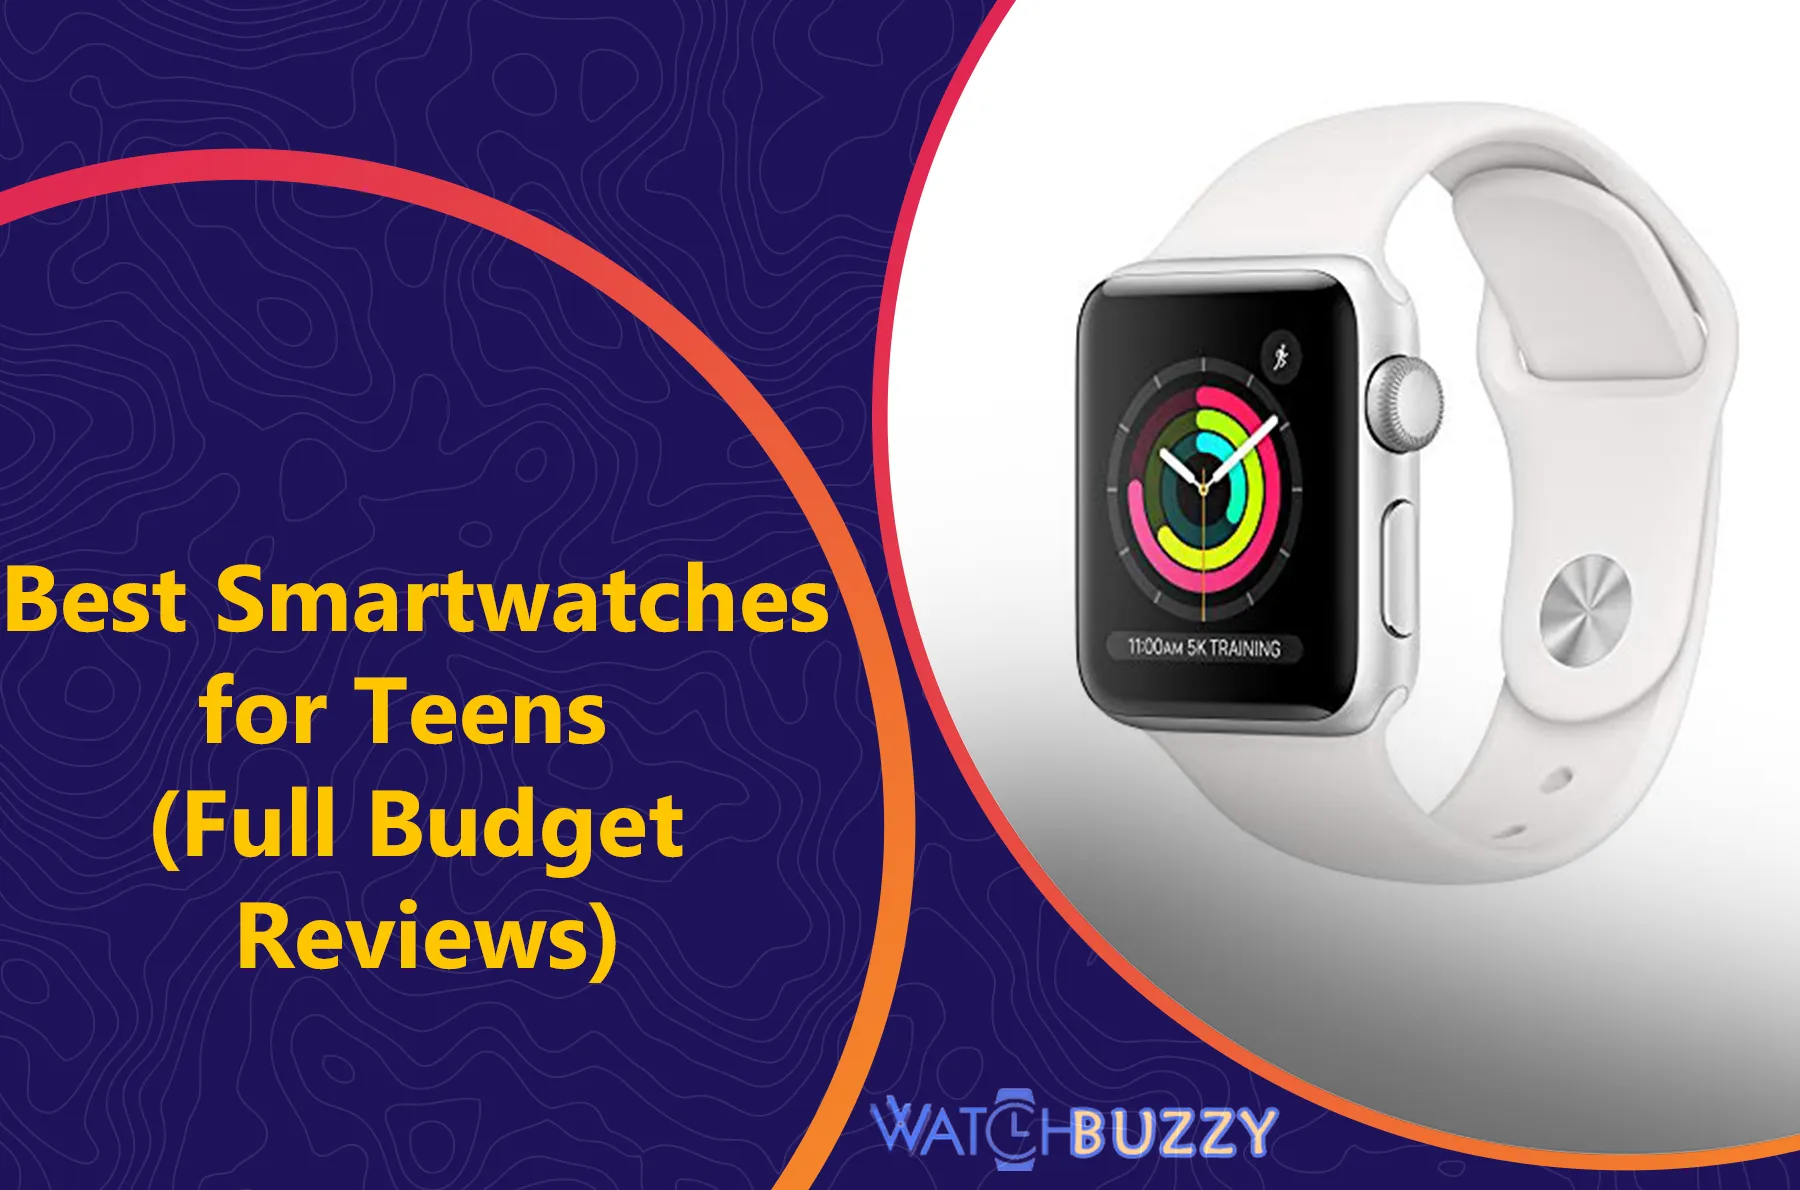 Best Smartwatches for Teens in 2022 (Full Budget Reviews)